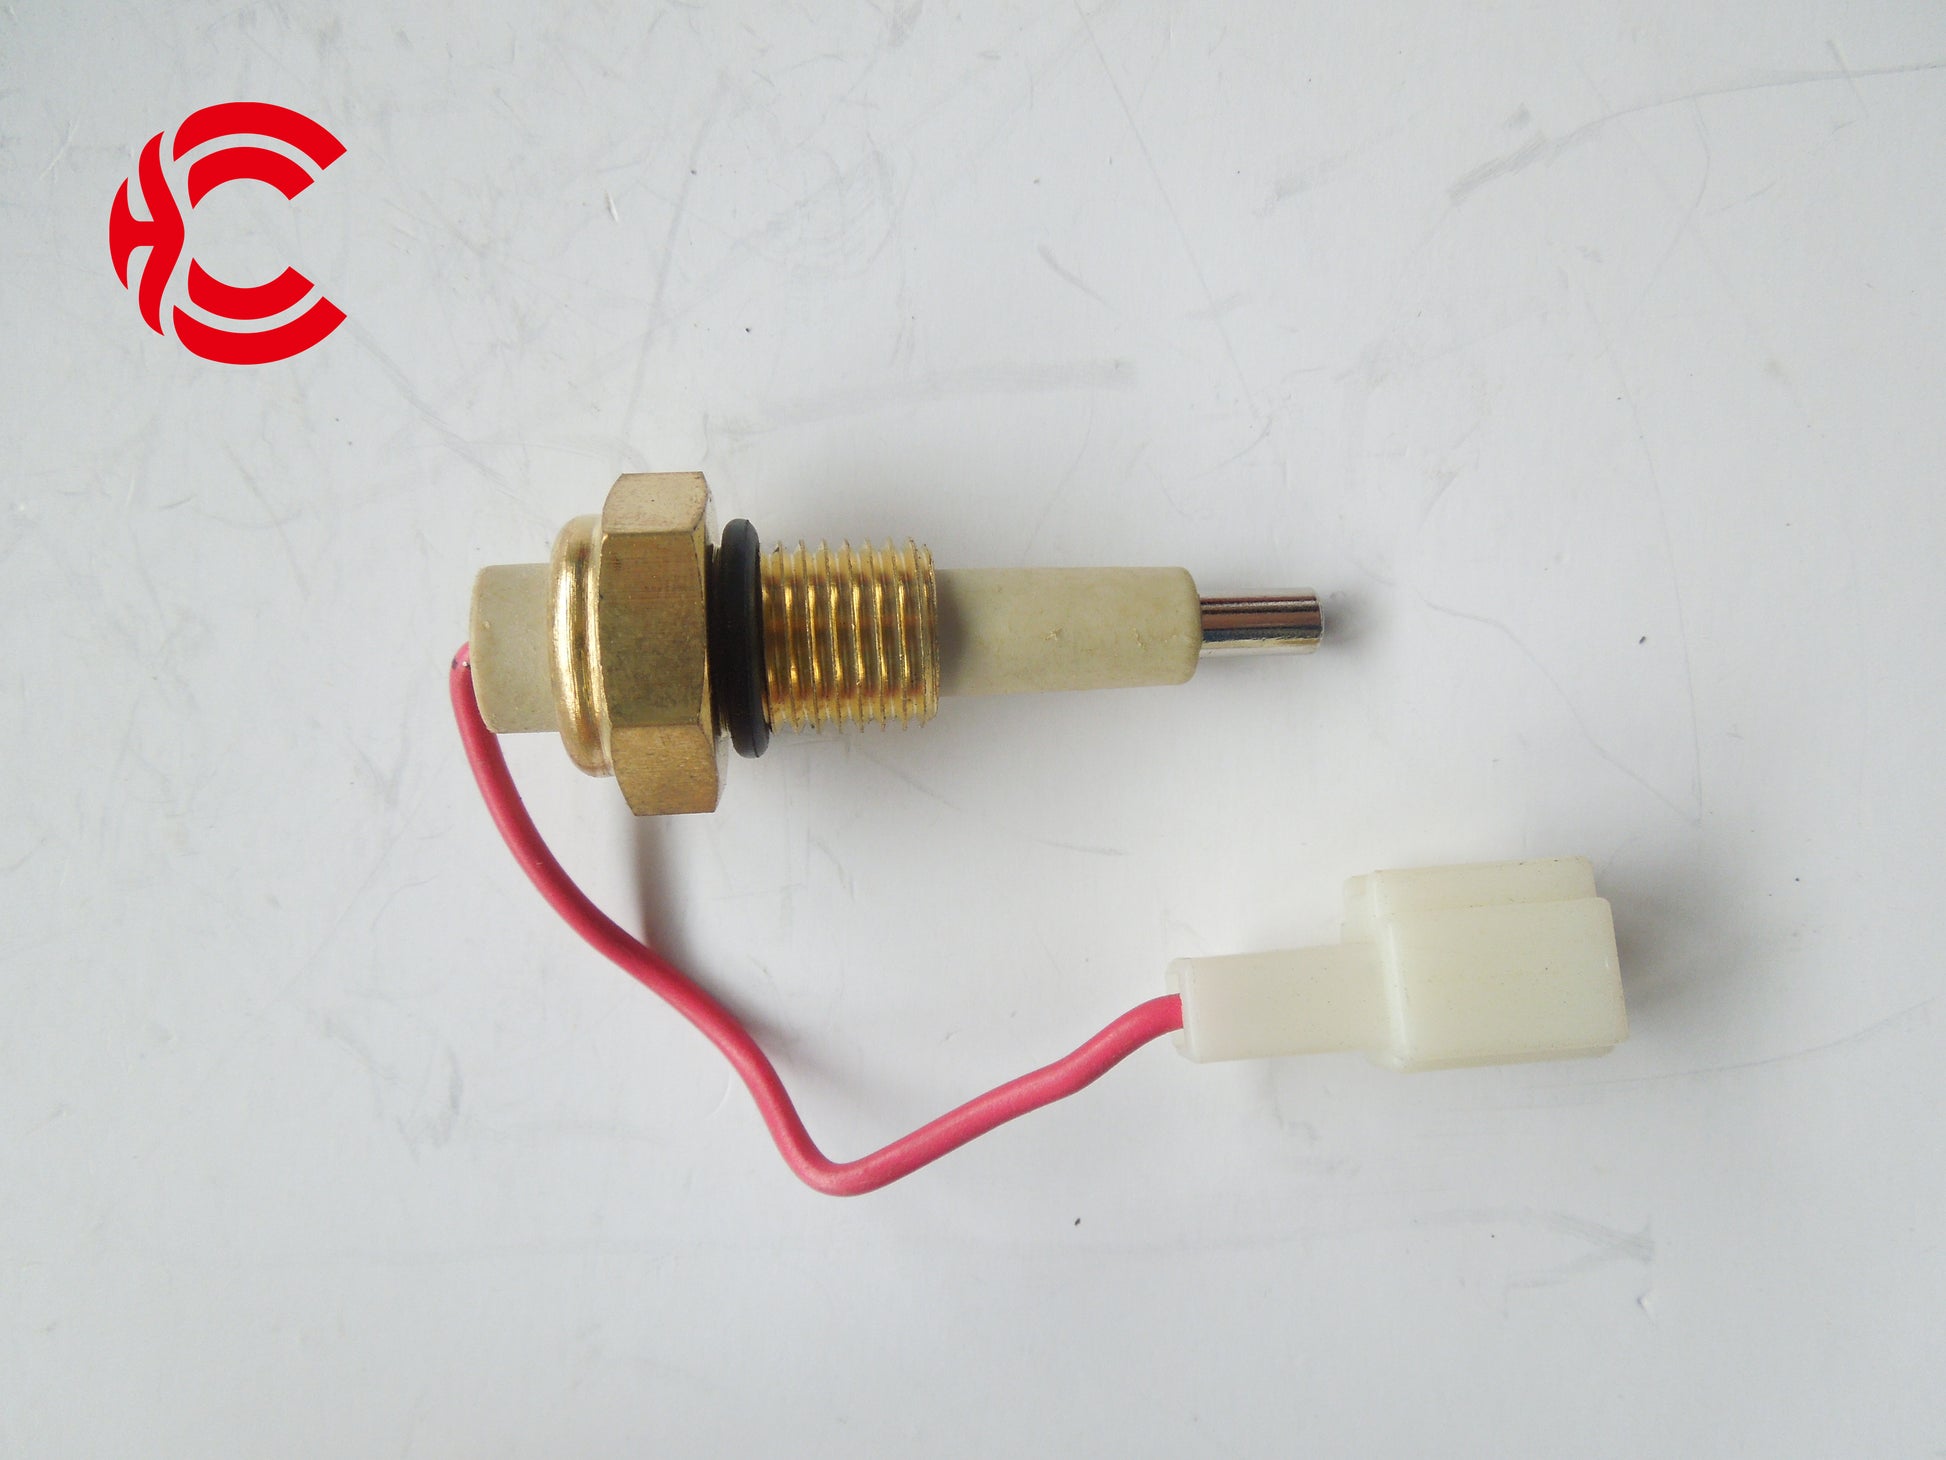 OEM: EQ153dxMaterial: ABS metalColor: Black GoldenOrigin: Made in ChinaWeight: 50gPacking List: 1* Coolant Level Alarm Sensor More ServiceWe can provide OEM Manufacturing serviceWe can Be your one-step solution for Auto PartsWe can provide technical scheme for you Feel Free to Contact Us, we will get back to you as soon as possible.